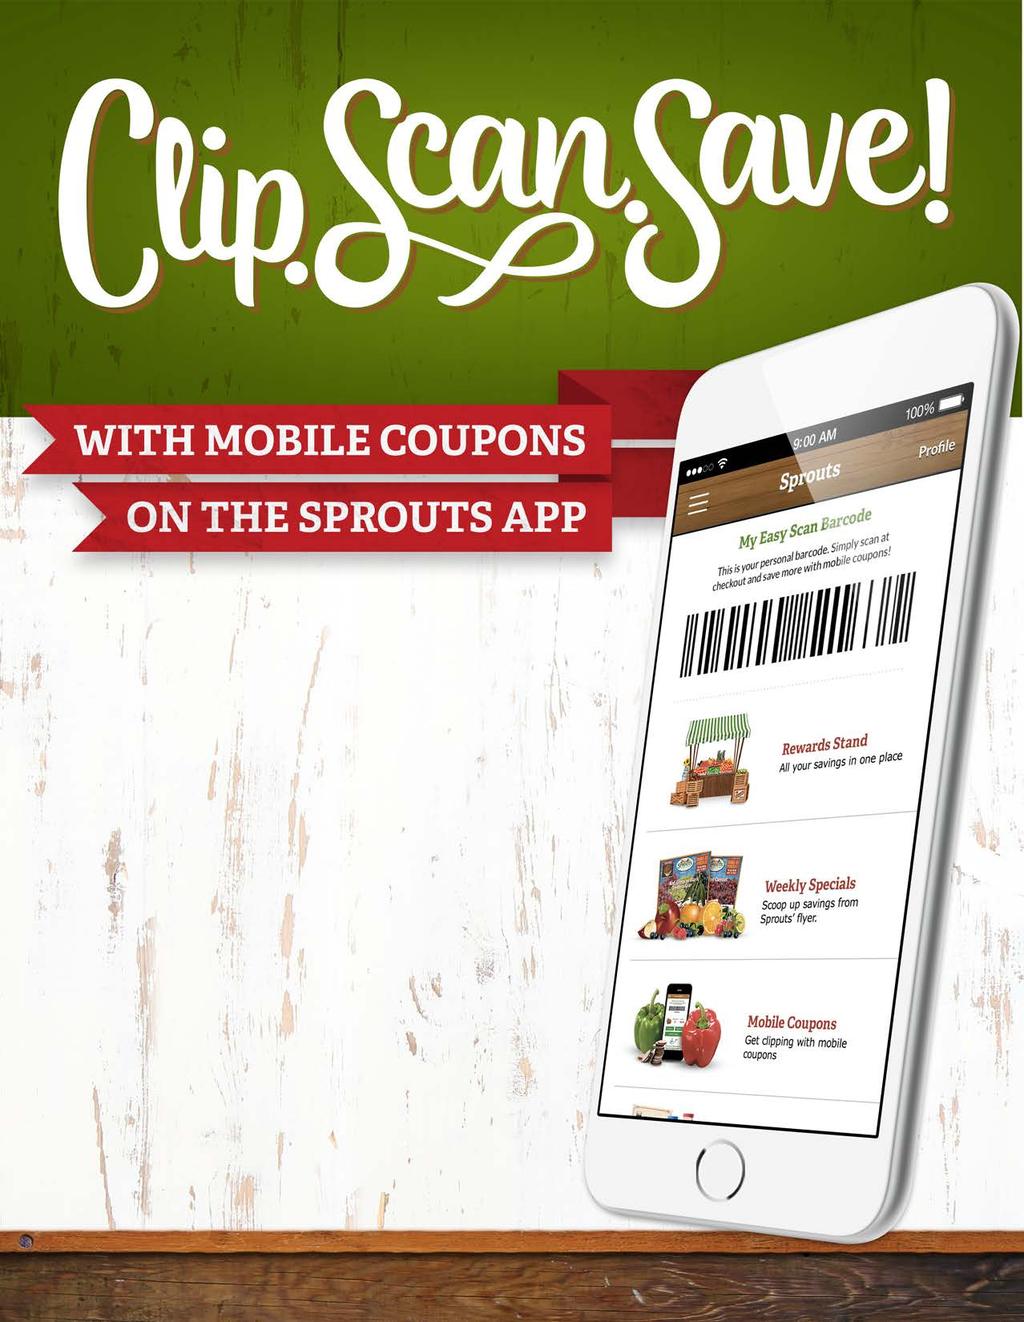 Mobile offers are a proven and reliable method of engaging shoppers online, in-store or on-the-go. CURRENTLY, SPROUTS HAS 500-550K APP VIEWS PER WEEK.